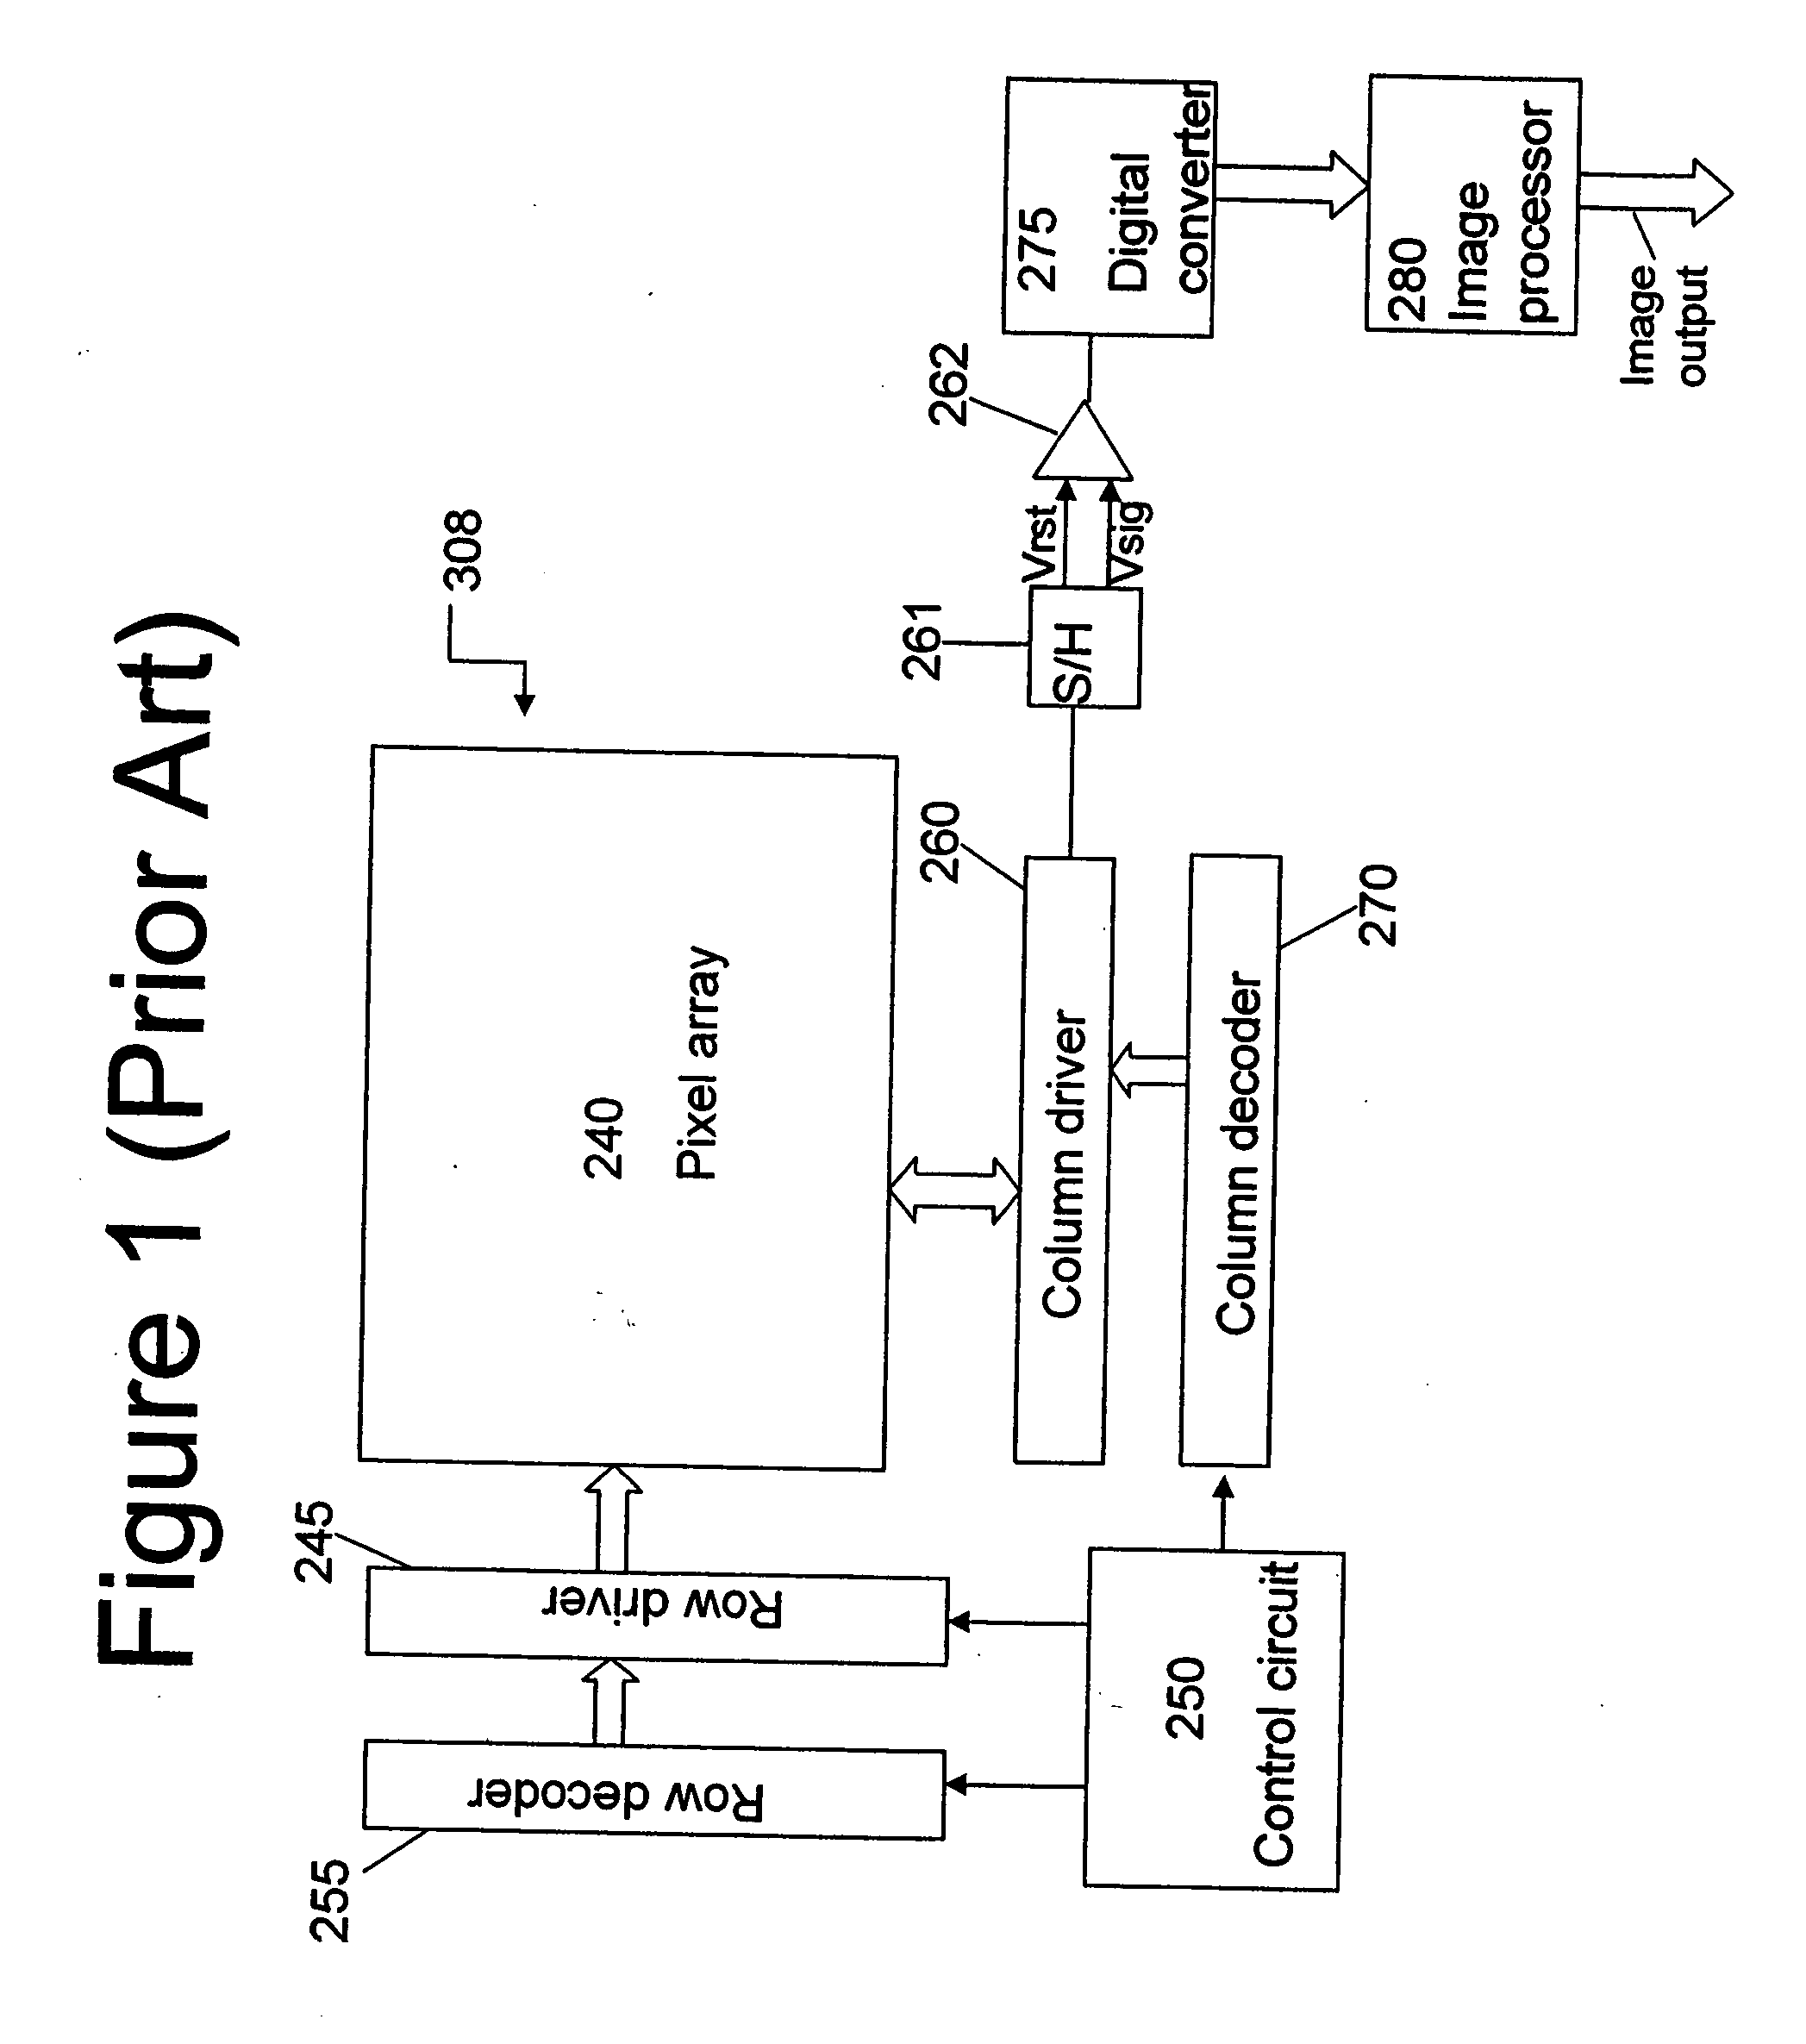 Wide dynamic range sensor having a pinned diode with multiple pinned voltages